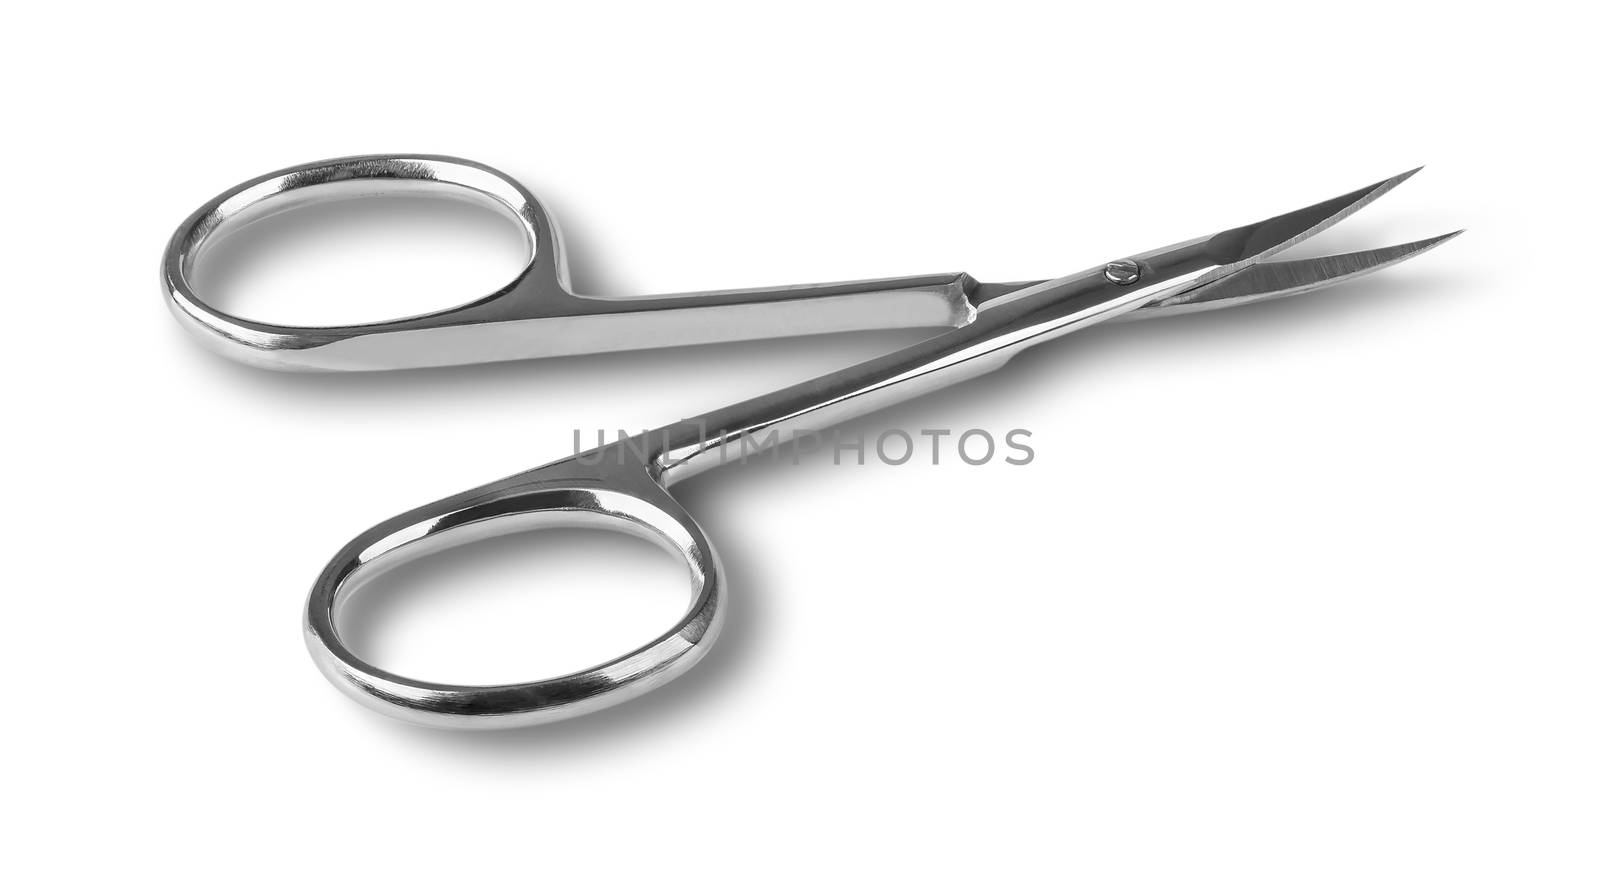 Disclosed professional nail scissors by Cipariss